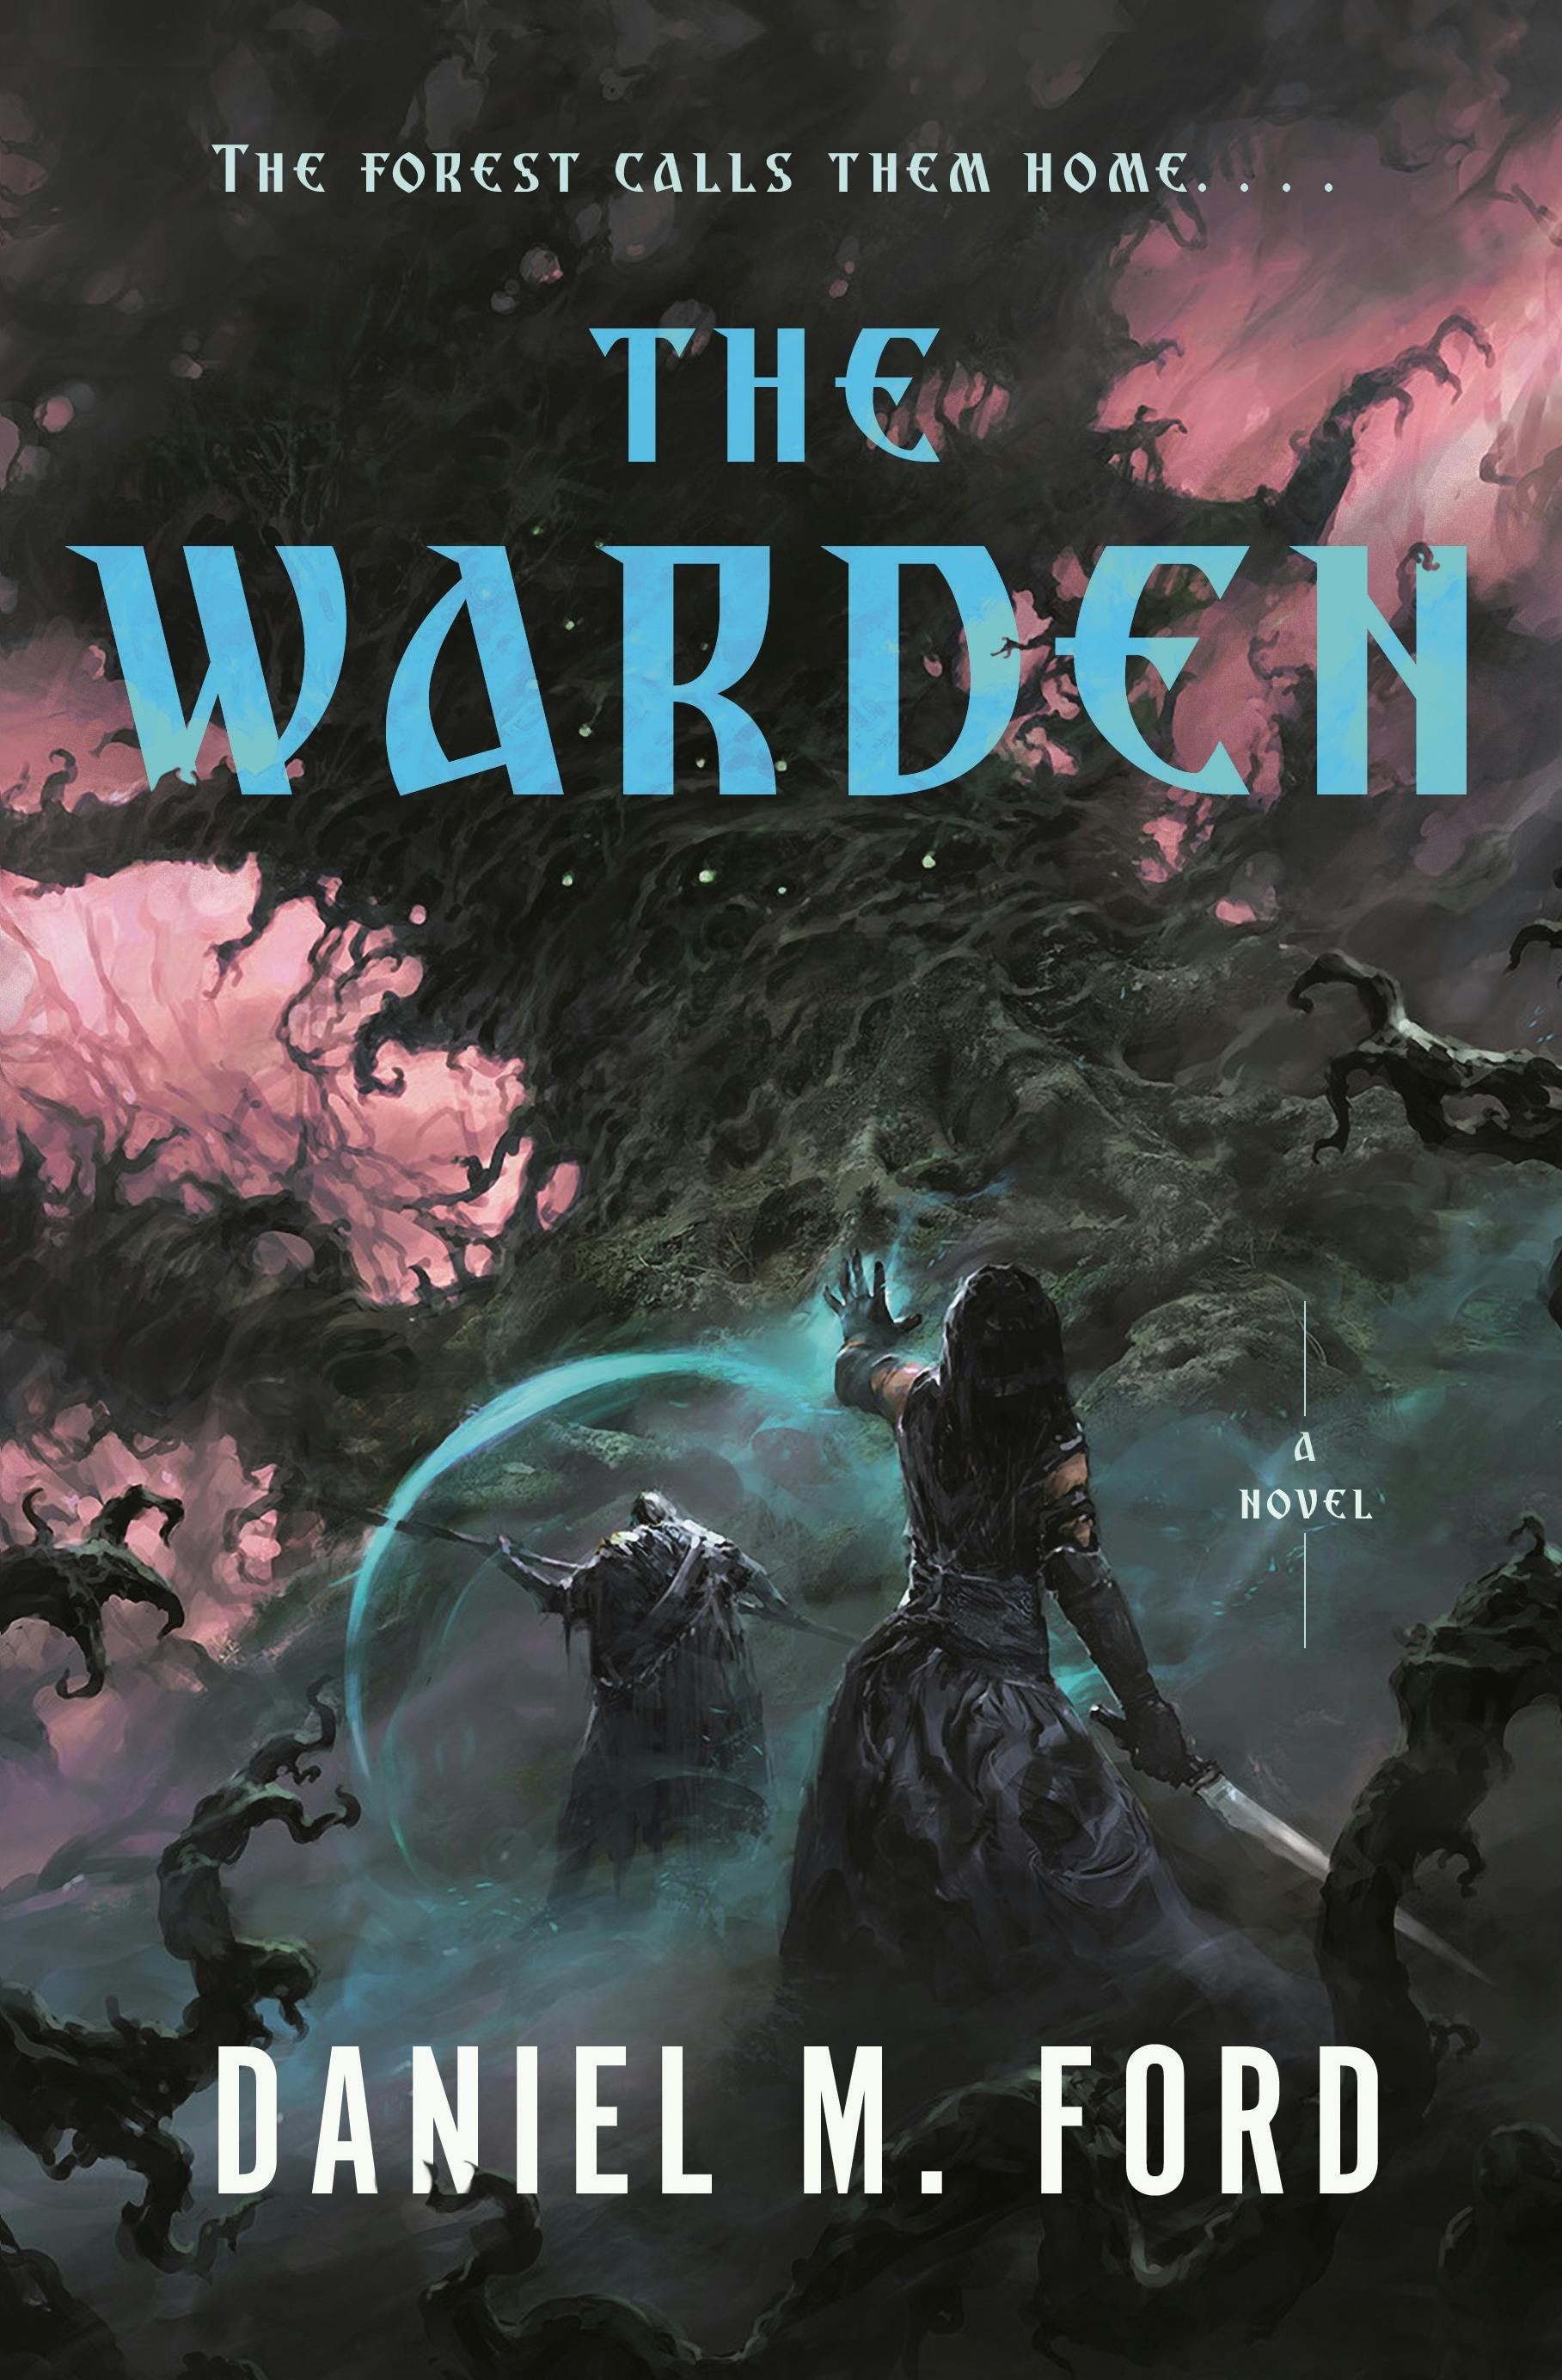 Cover for the book titled as: The Warden